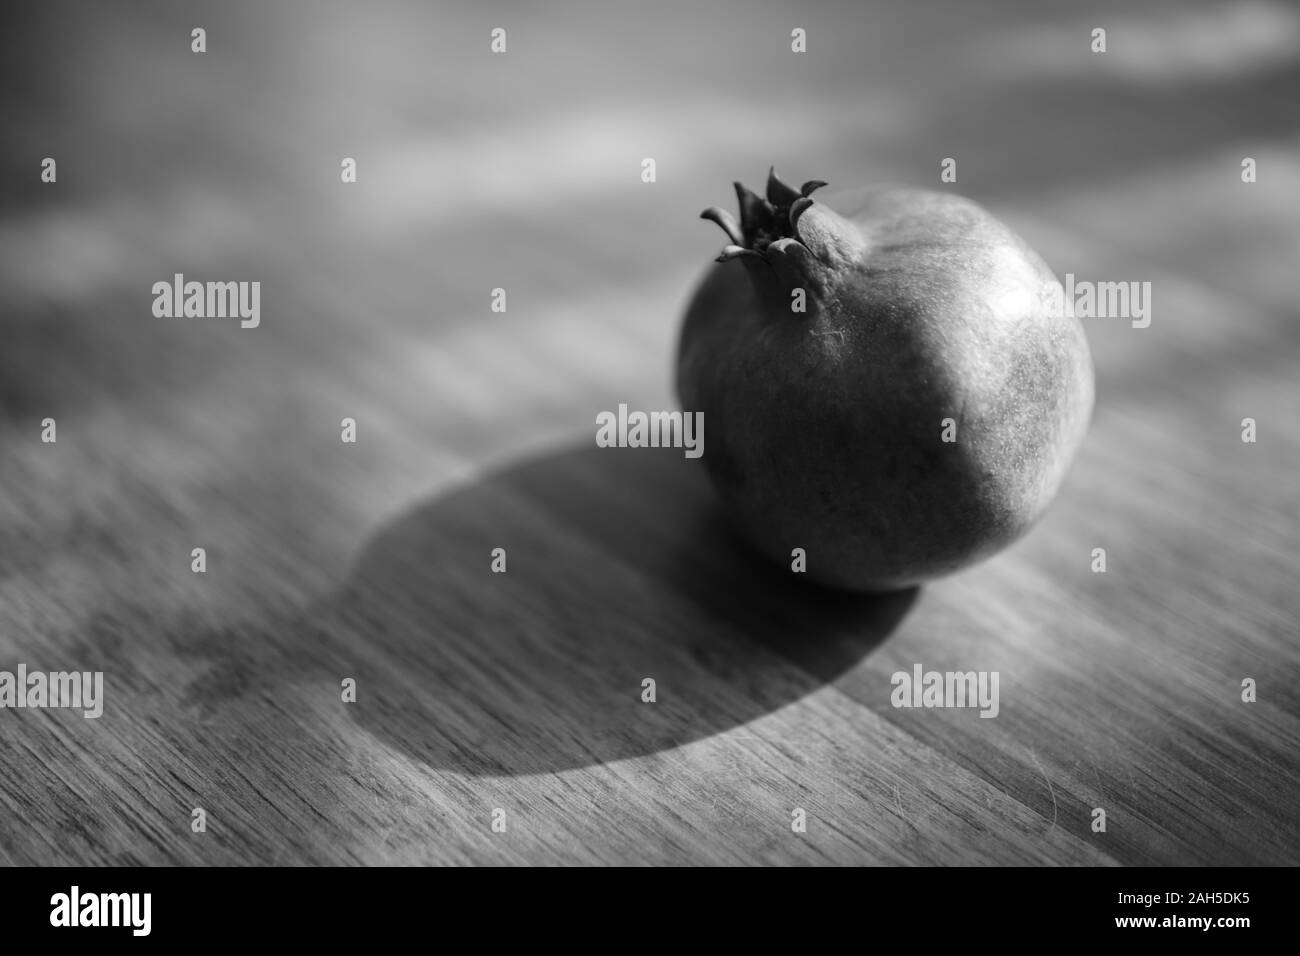 Whole ripe pomegranate on the wooden sunny table. Stock Photo